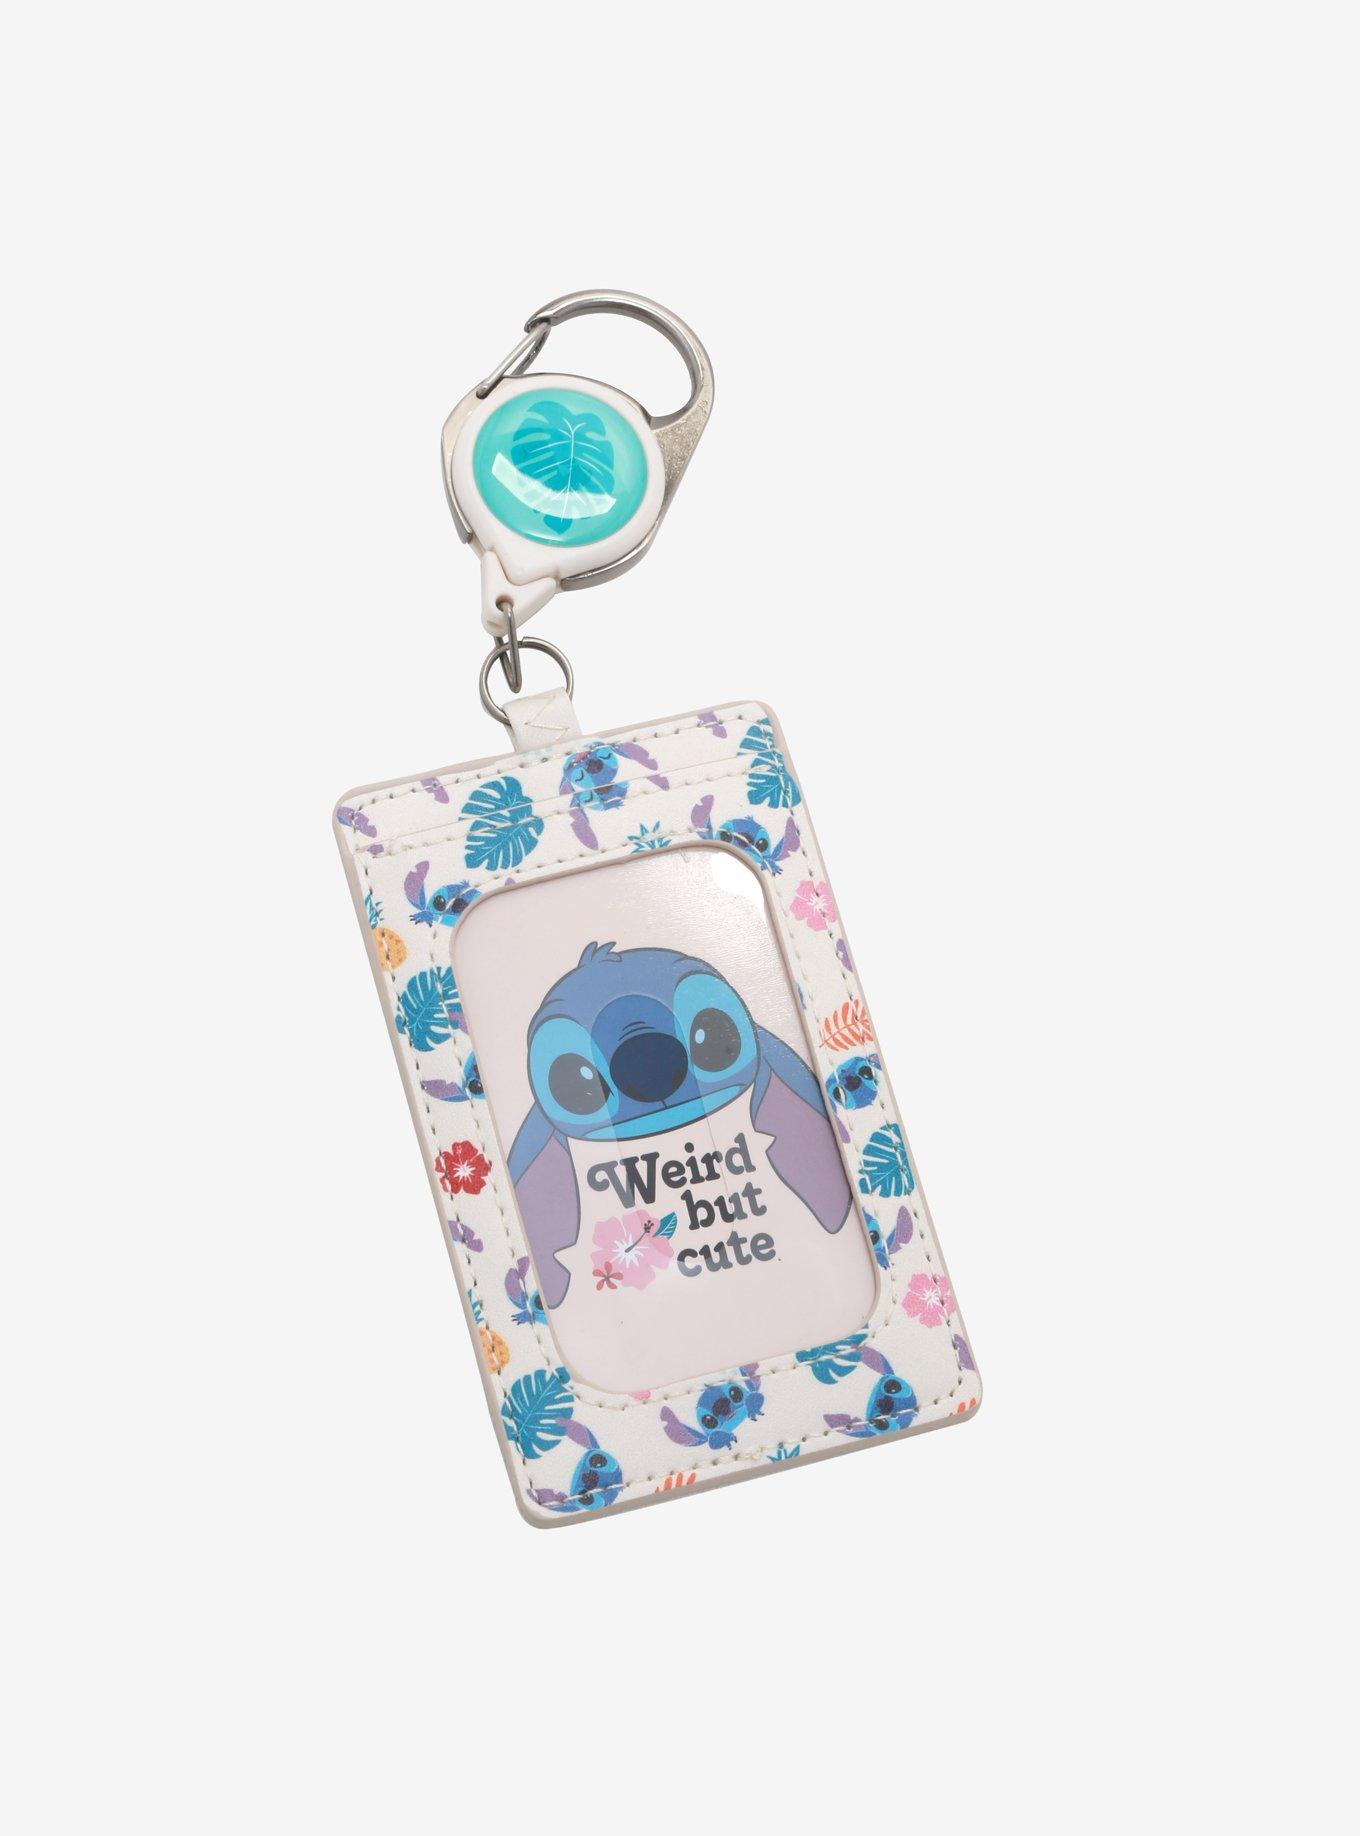  Stitch Merchandise Stuff Gift Set for Girls, Stitch Anime  Drawstring Bag, Keychain Lanyard, Purse, Bracelets, Stickers, Button Pins,  Necklace, ID Card Holder (Black B) : Clothing, Shoes & Jewelry